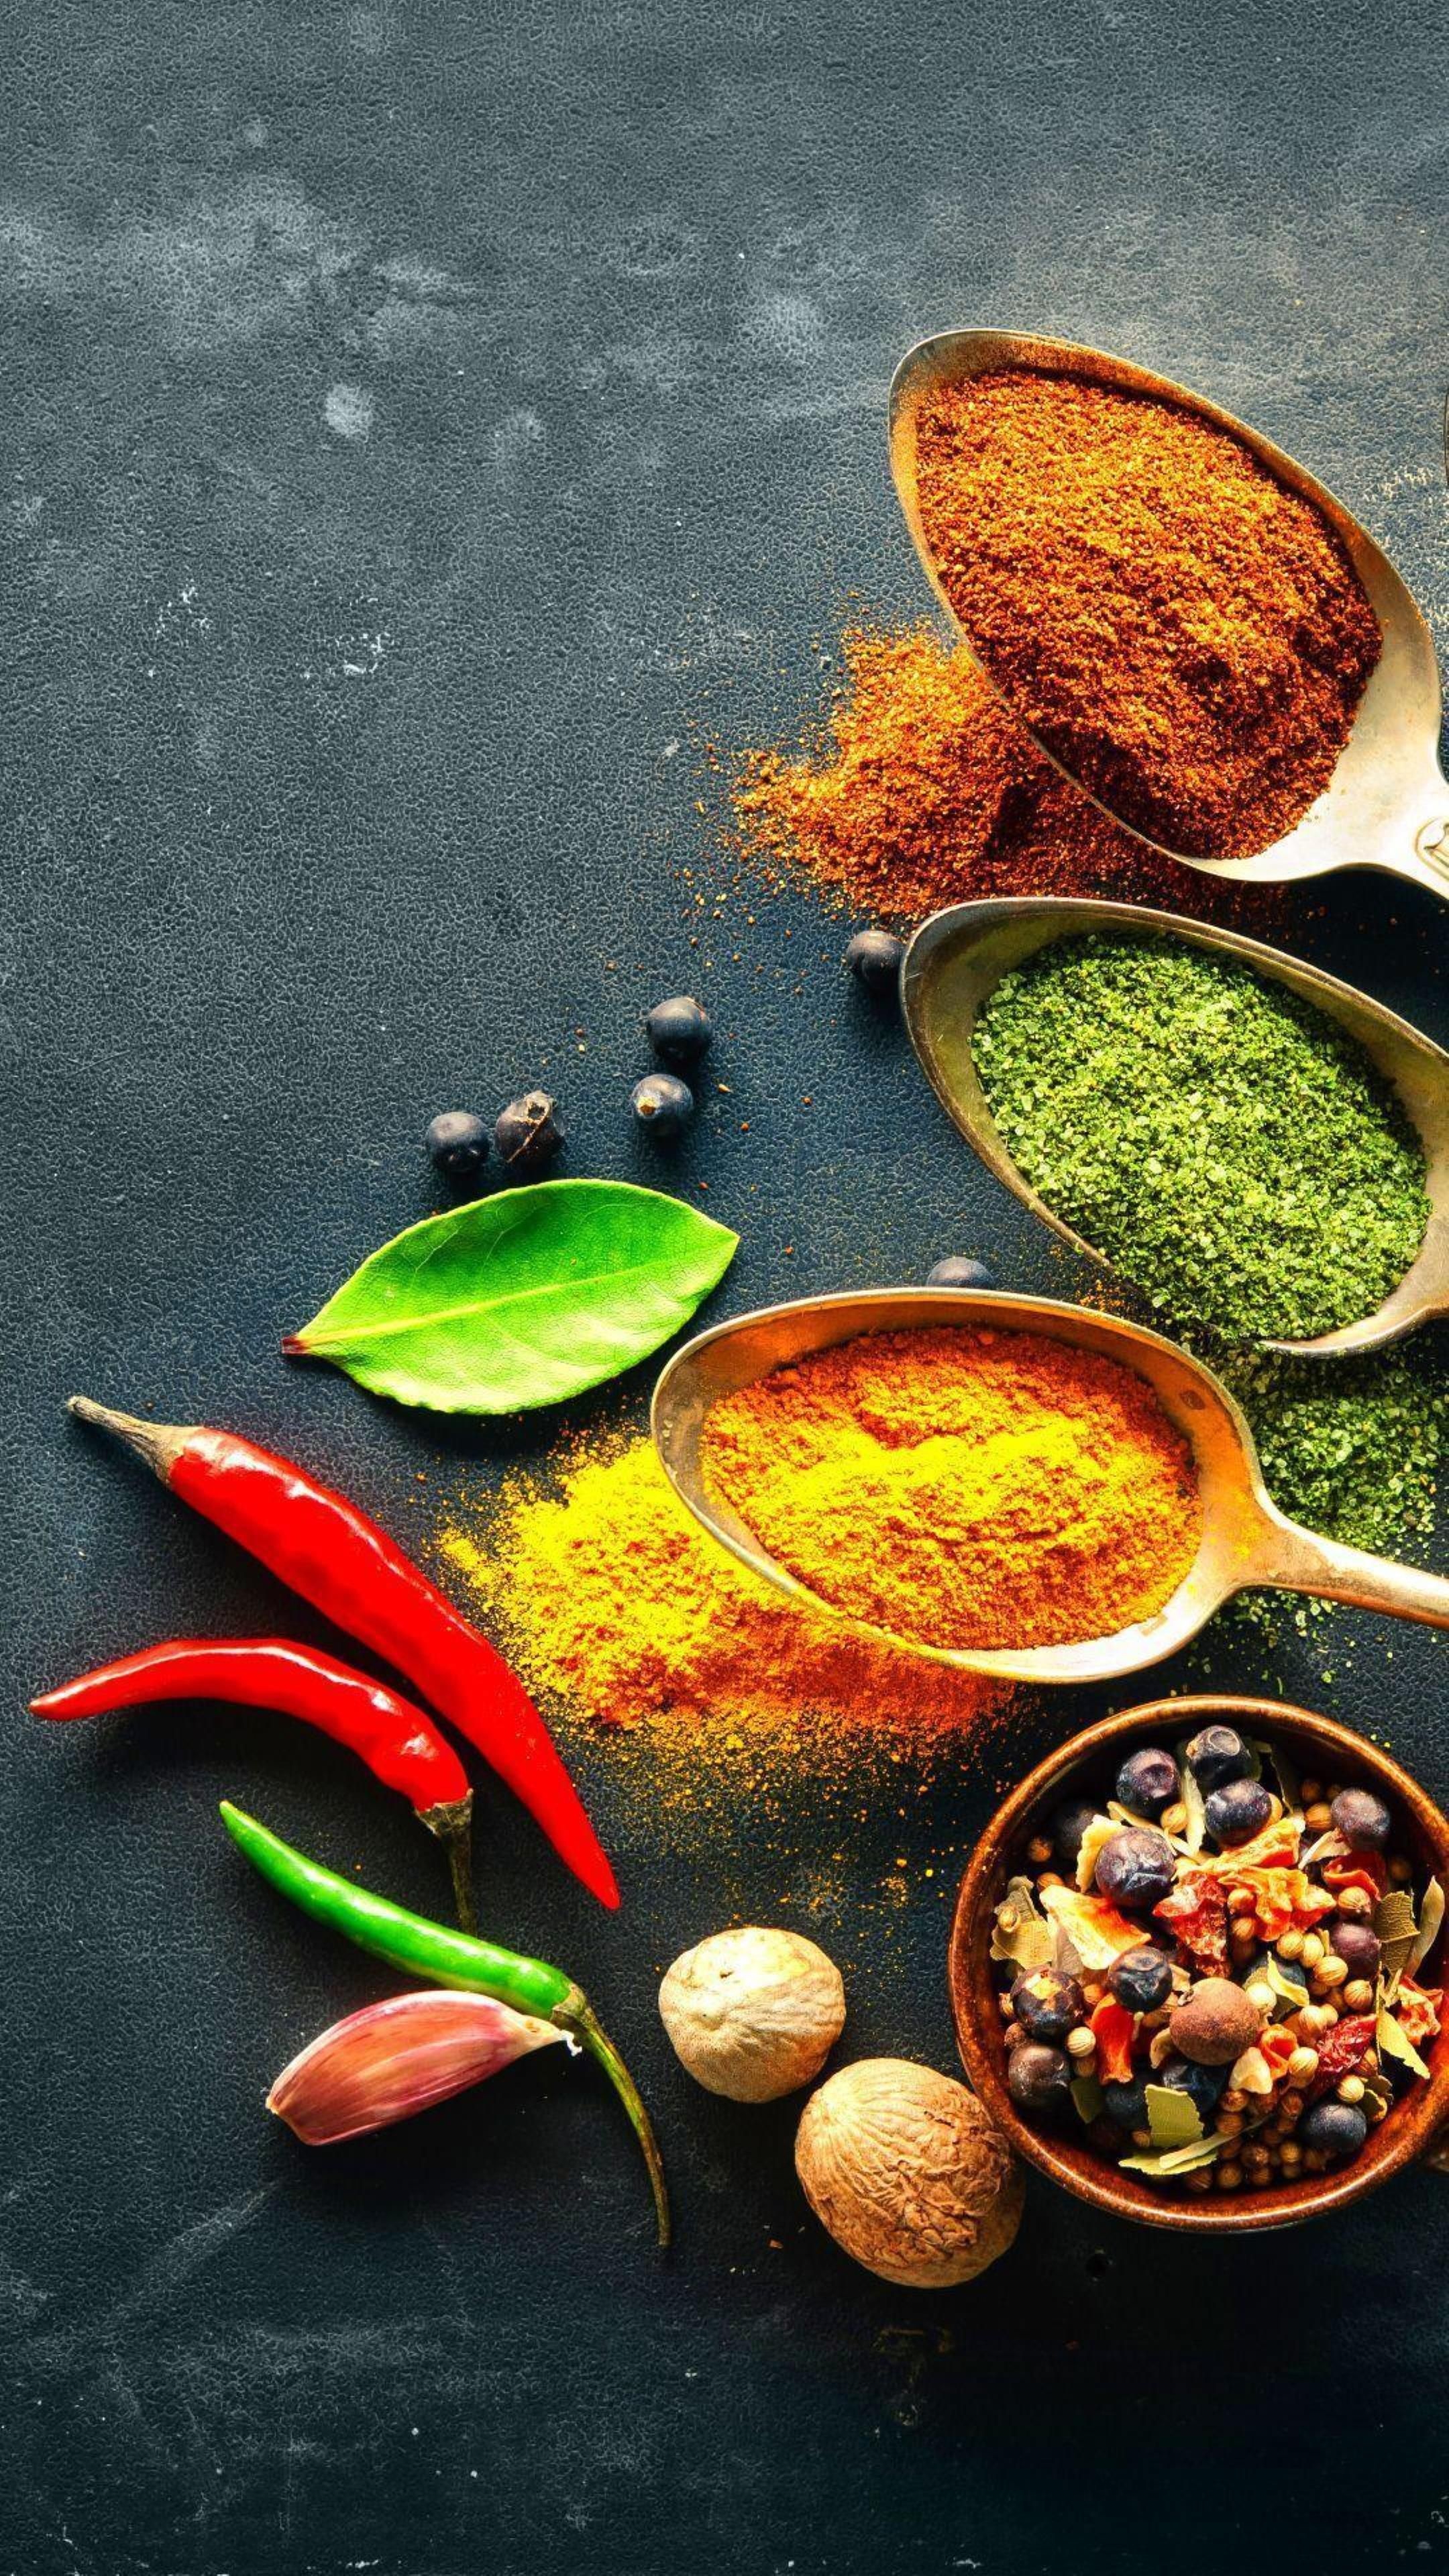 Spices: Enhancing the flavor of food, Pepper mix, Herbs, Garlic. 2160x3840 4K Background.